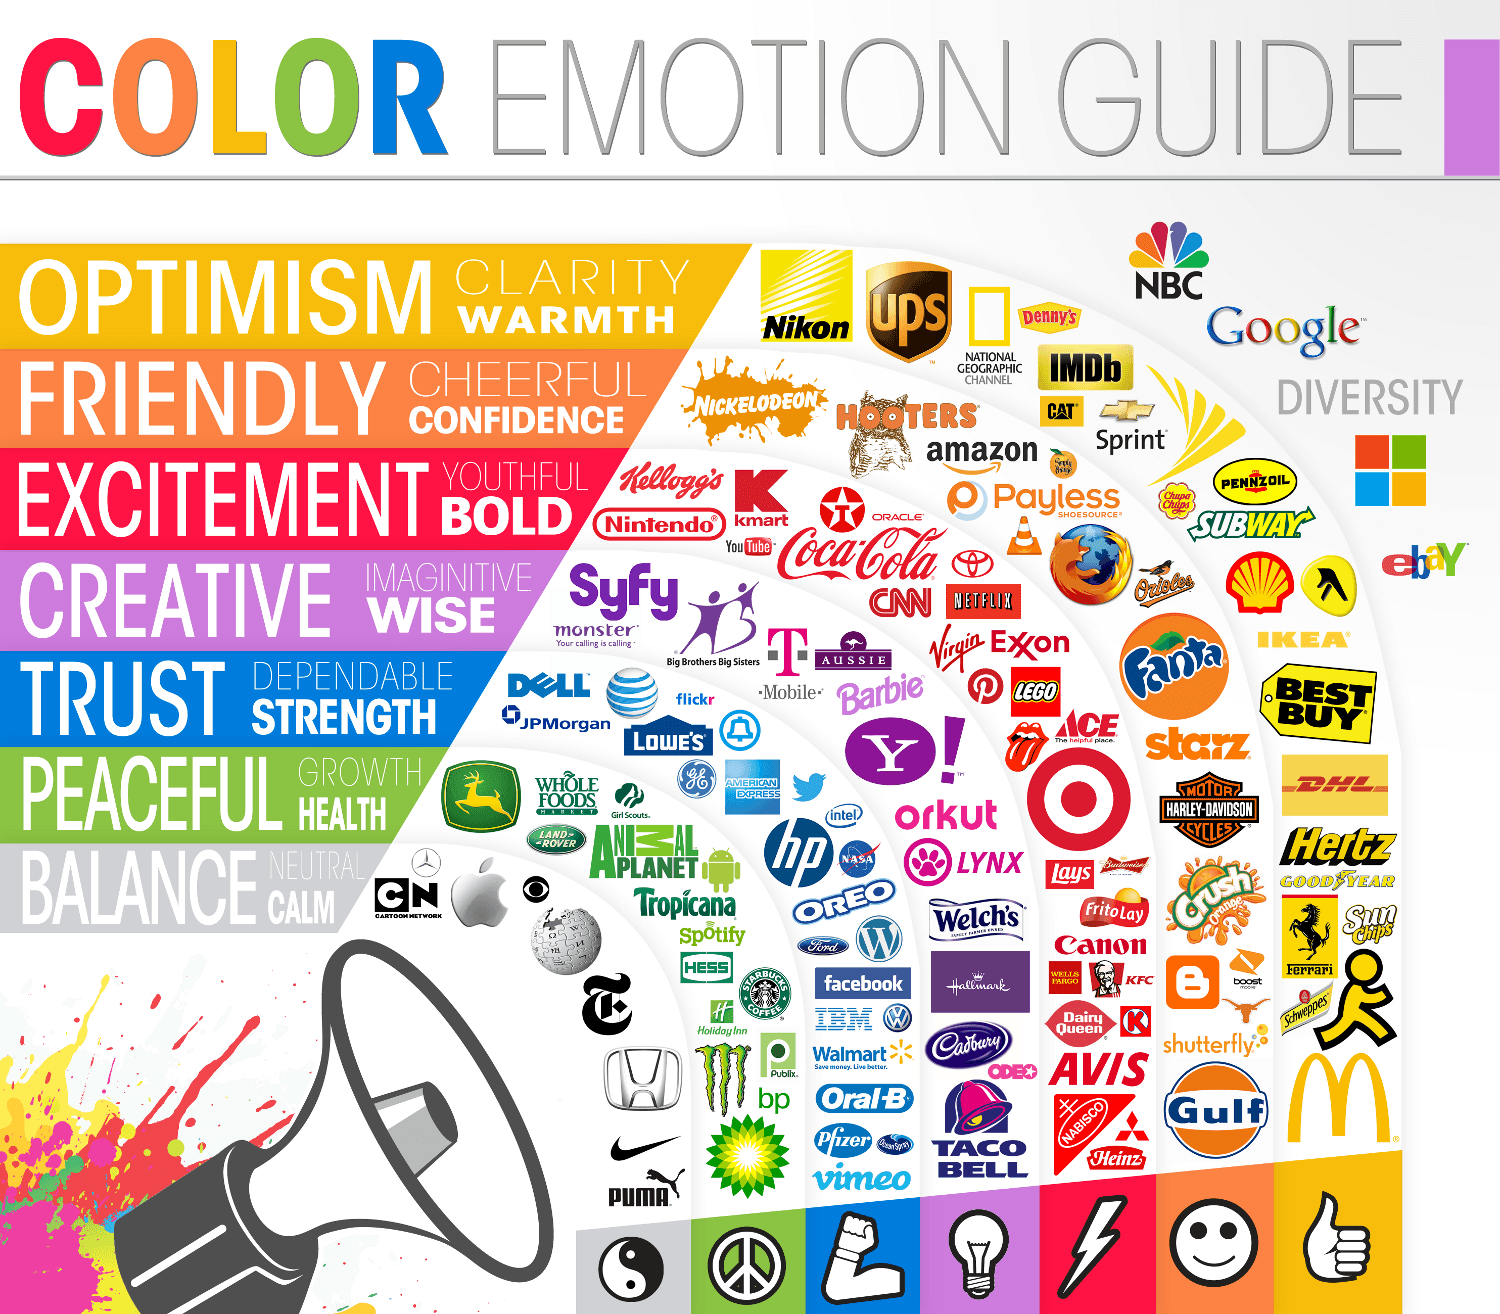 Yellow Square with Channel Logo - The Psychology Of Color In Logo Design - The Logo Company